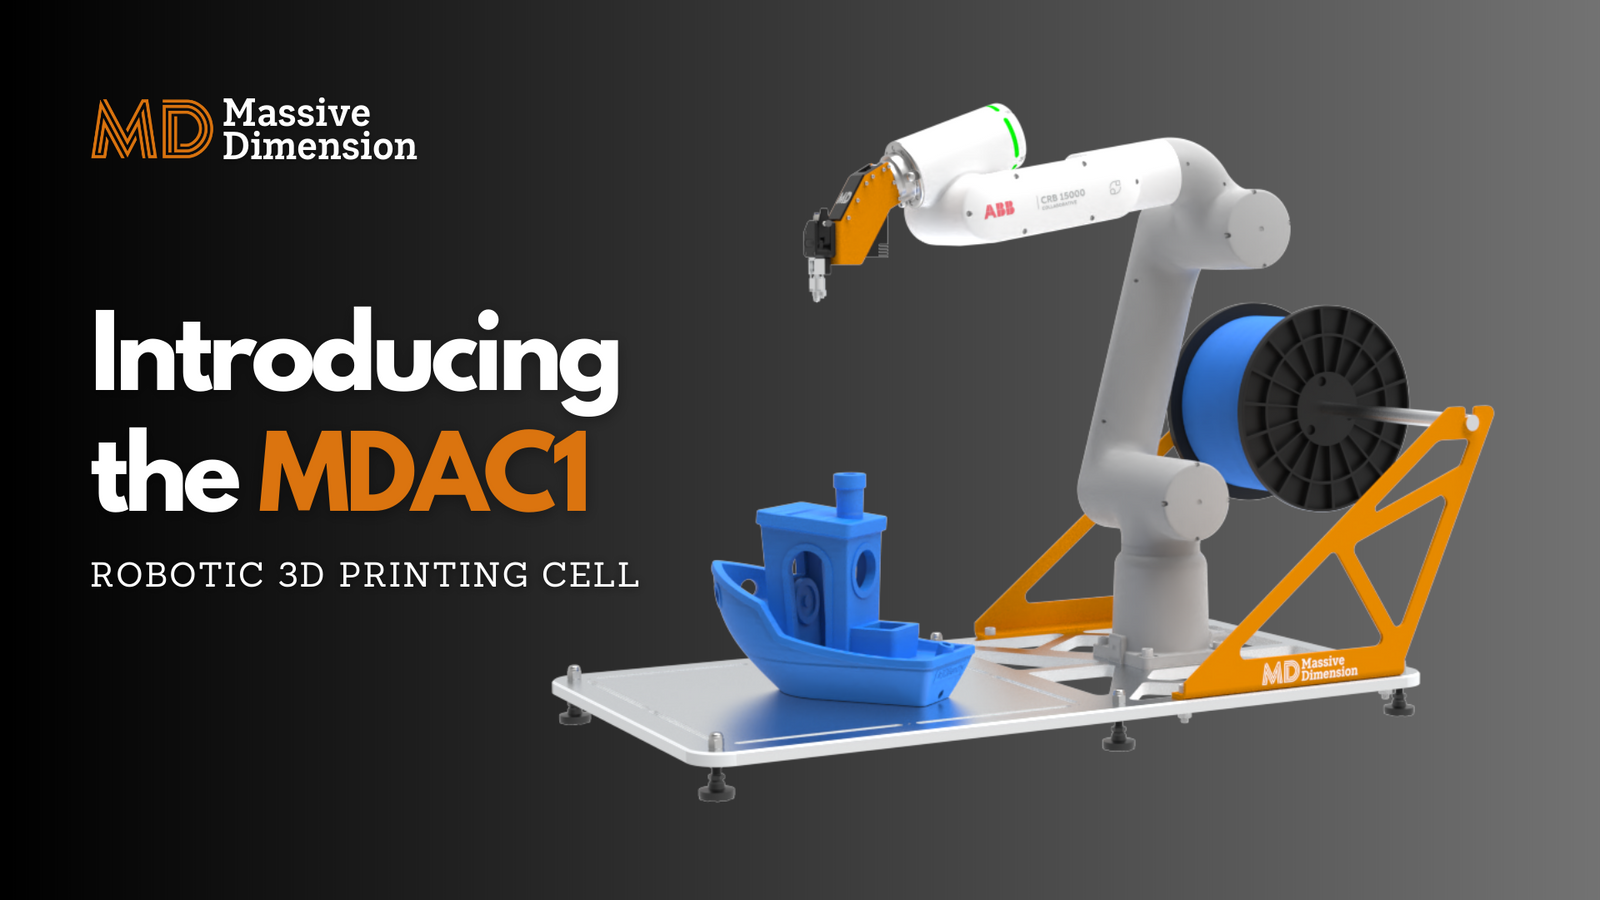 Introducing MDAC1 - Our Latest Innovation!